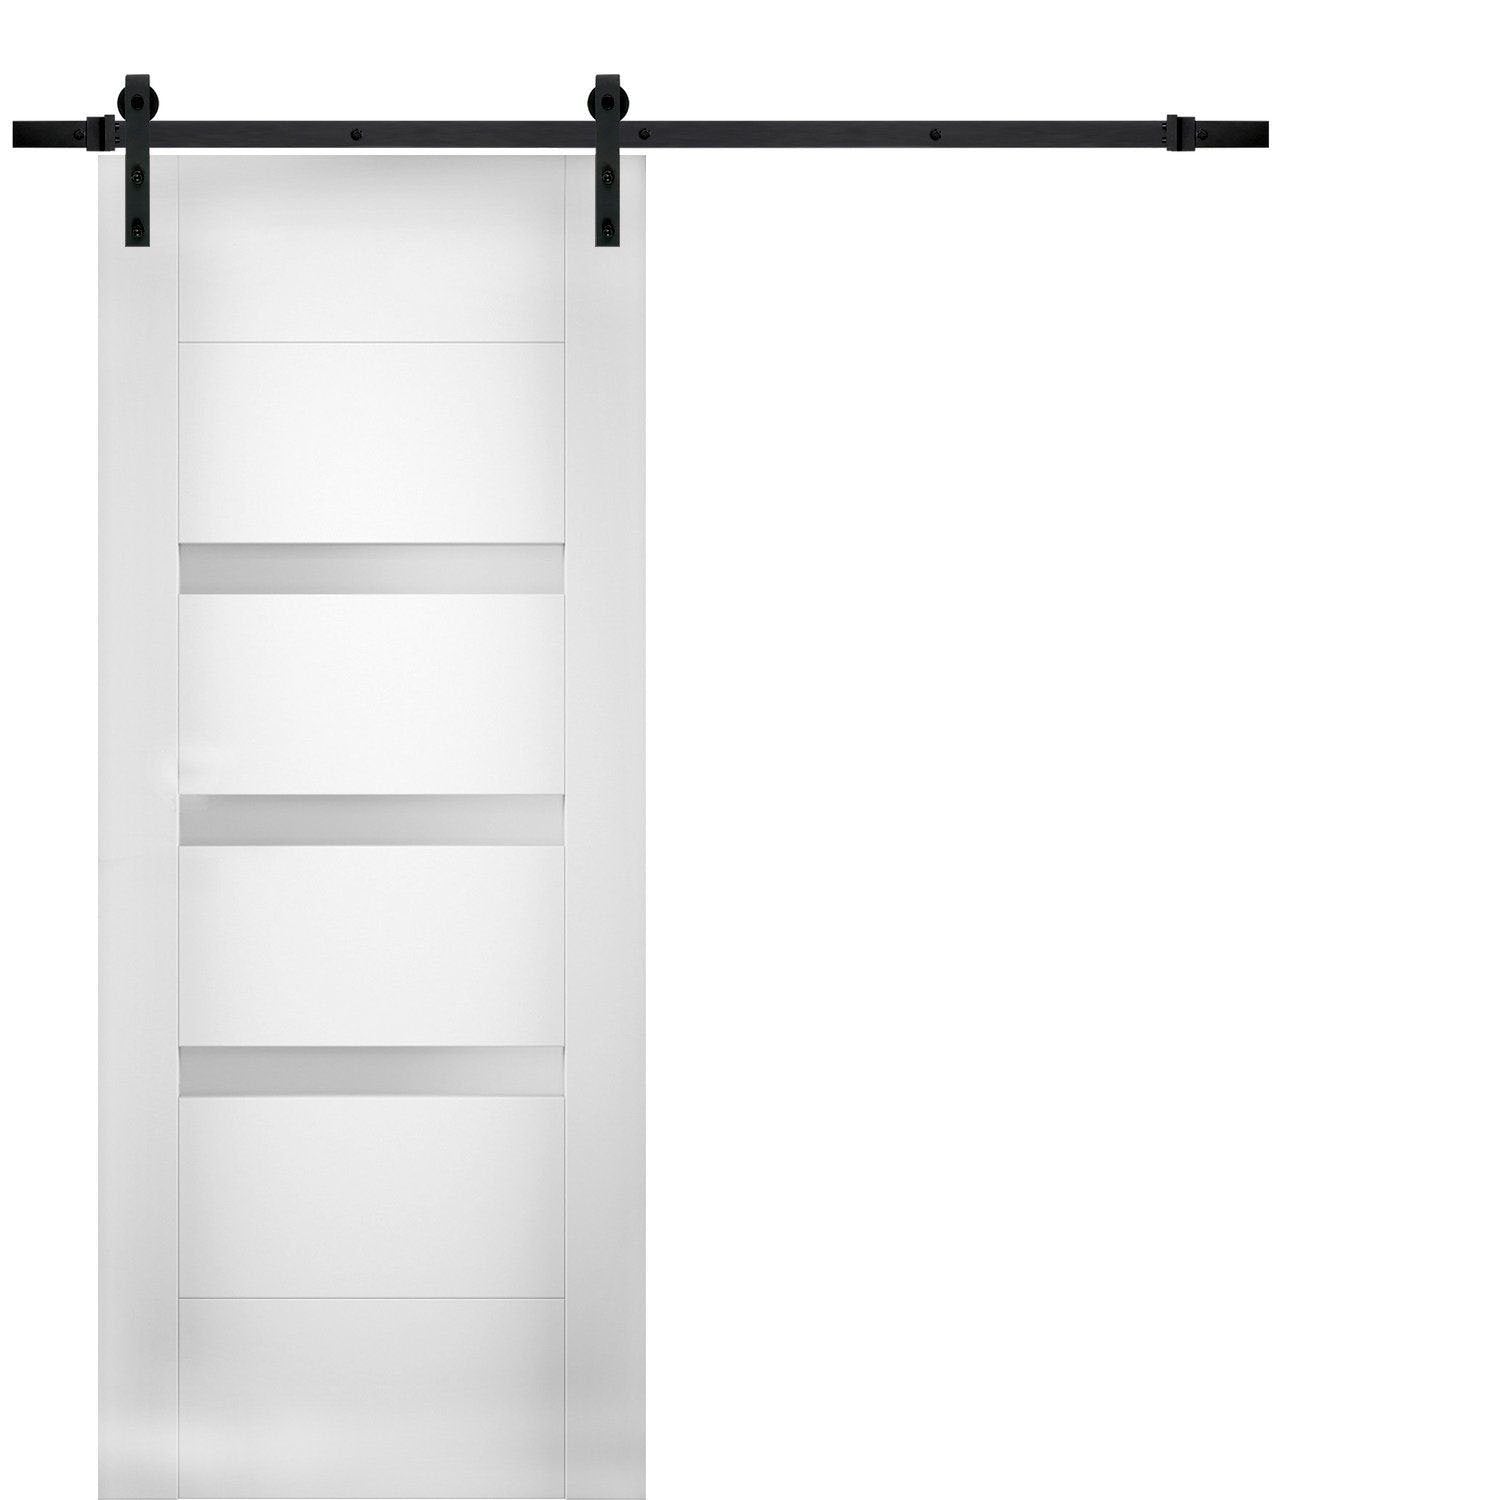 Sete 6900 White Silk Barn Door with Frosted Glass and Black Rail